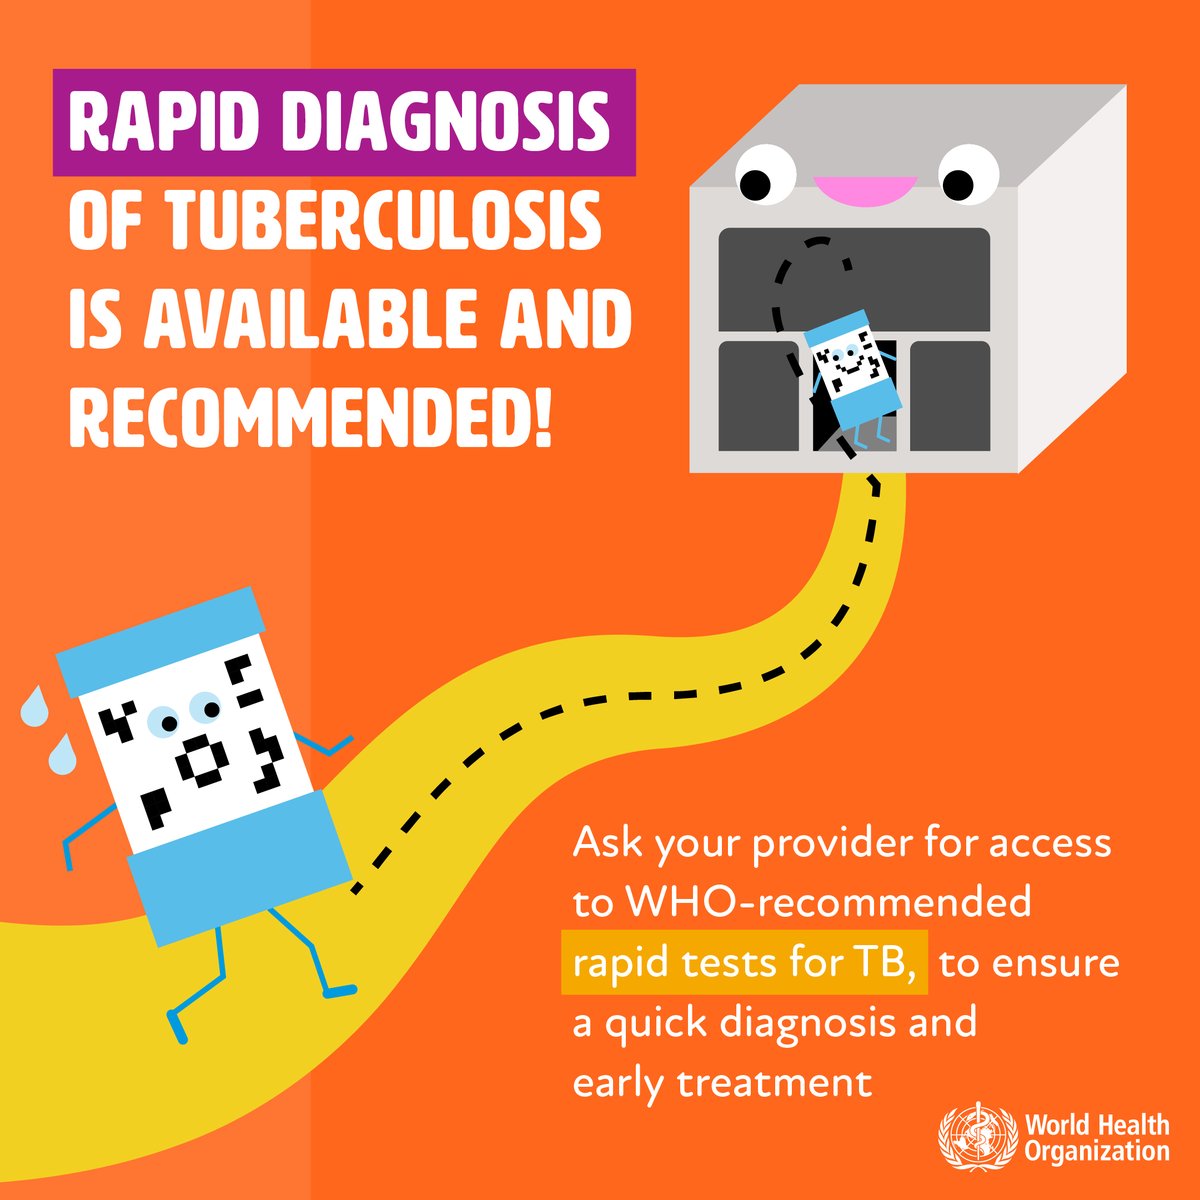 To ensure quick diagnosis and early treatment, WHO recommends the use of rapid molecular #tuberculosis (TB) tests as the initial diagnostic test for all persons with signs and symptoms of TB. #WorldTBDay #EndTB